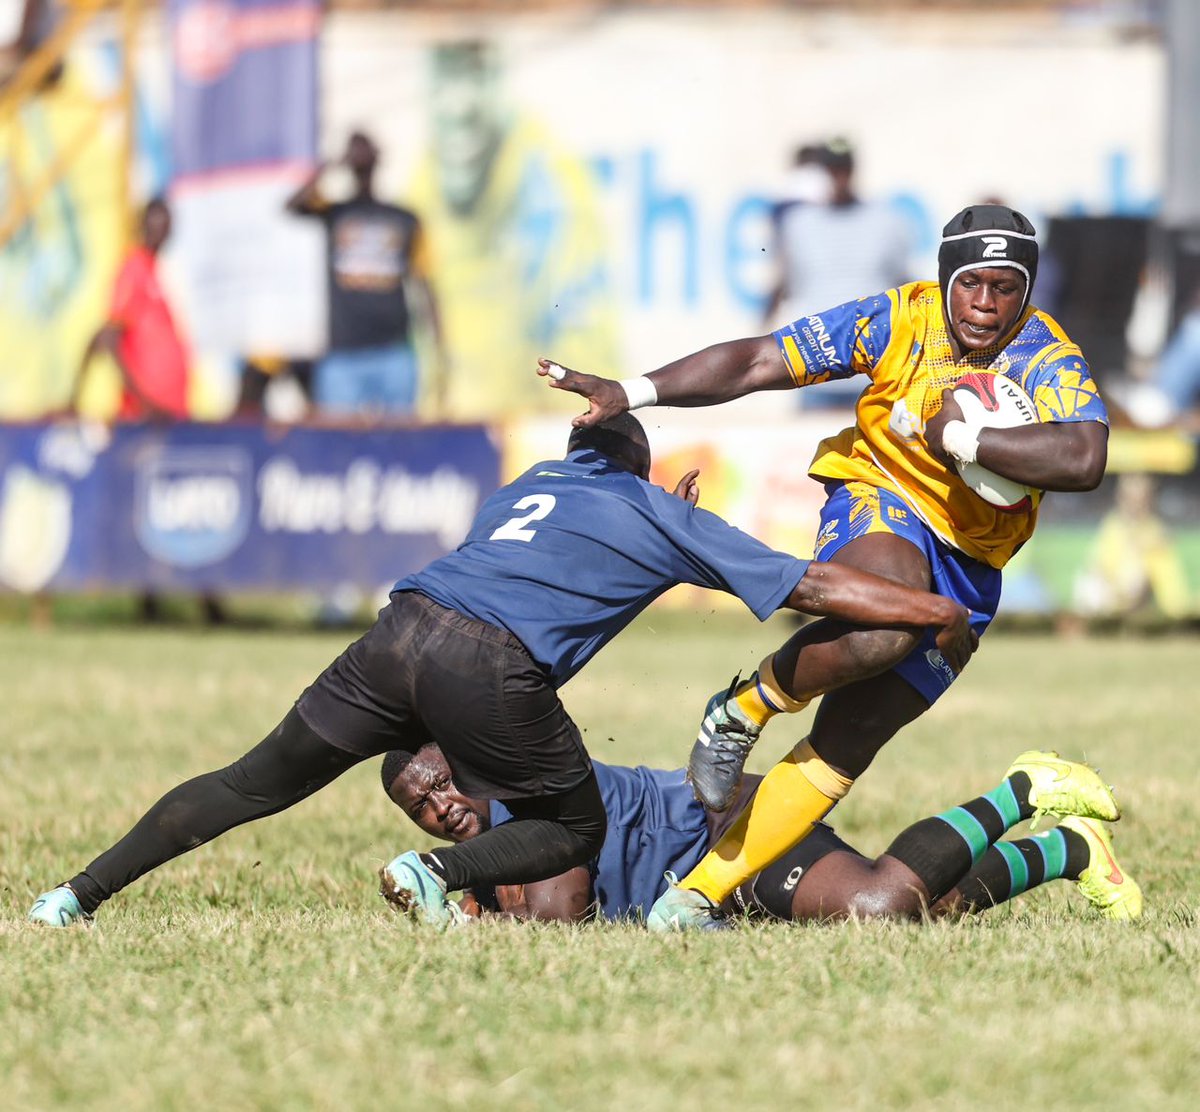 The Nile Special Rugby Championship Updates! Both the Stanbic Black Pirates and Platinum Credit Heathens reach the Nile Special Rugby Championship final which is scheduled to take place on 1st June. #NileSpecialRugby #RaiseYourGame #UgandaRugby